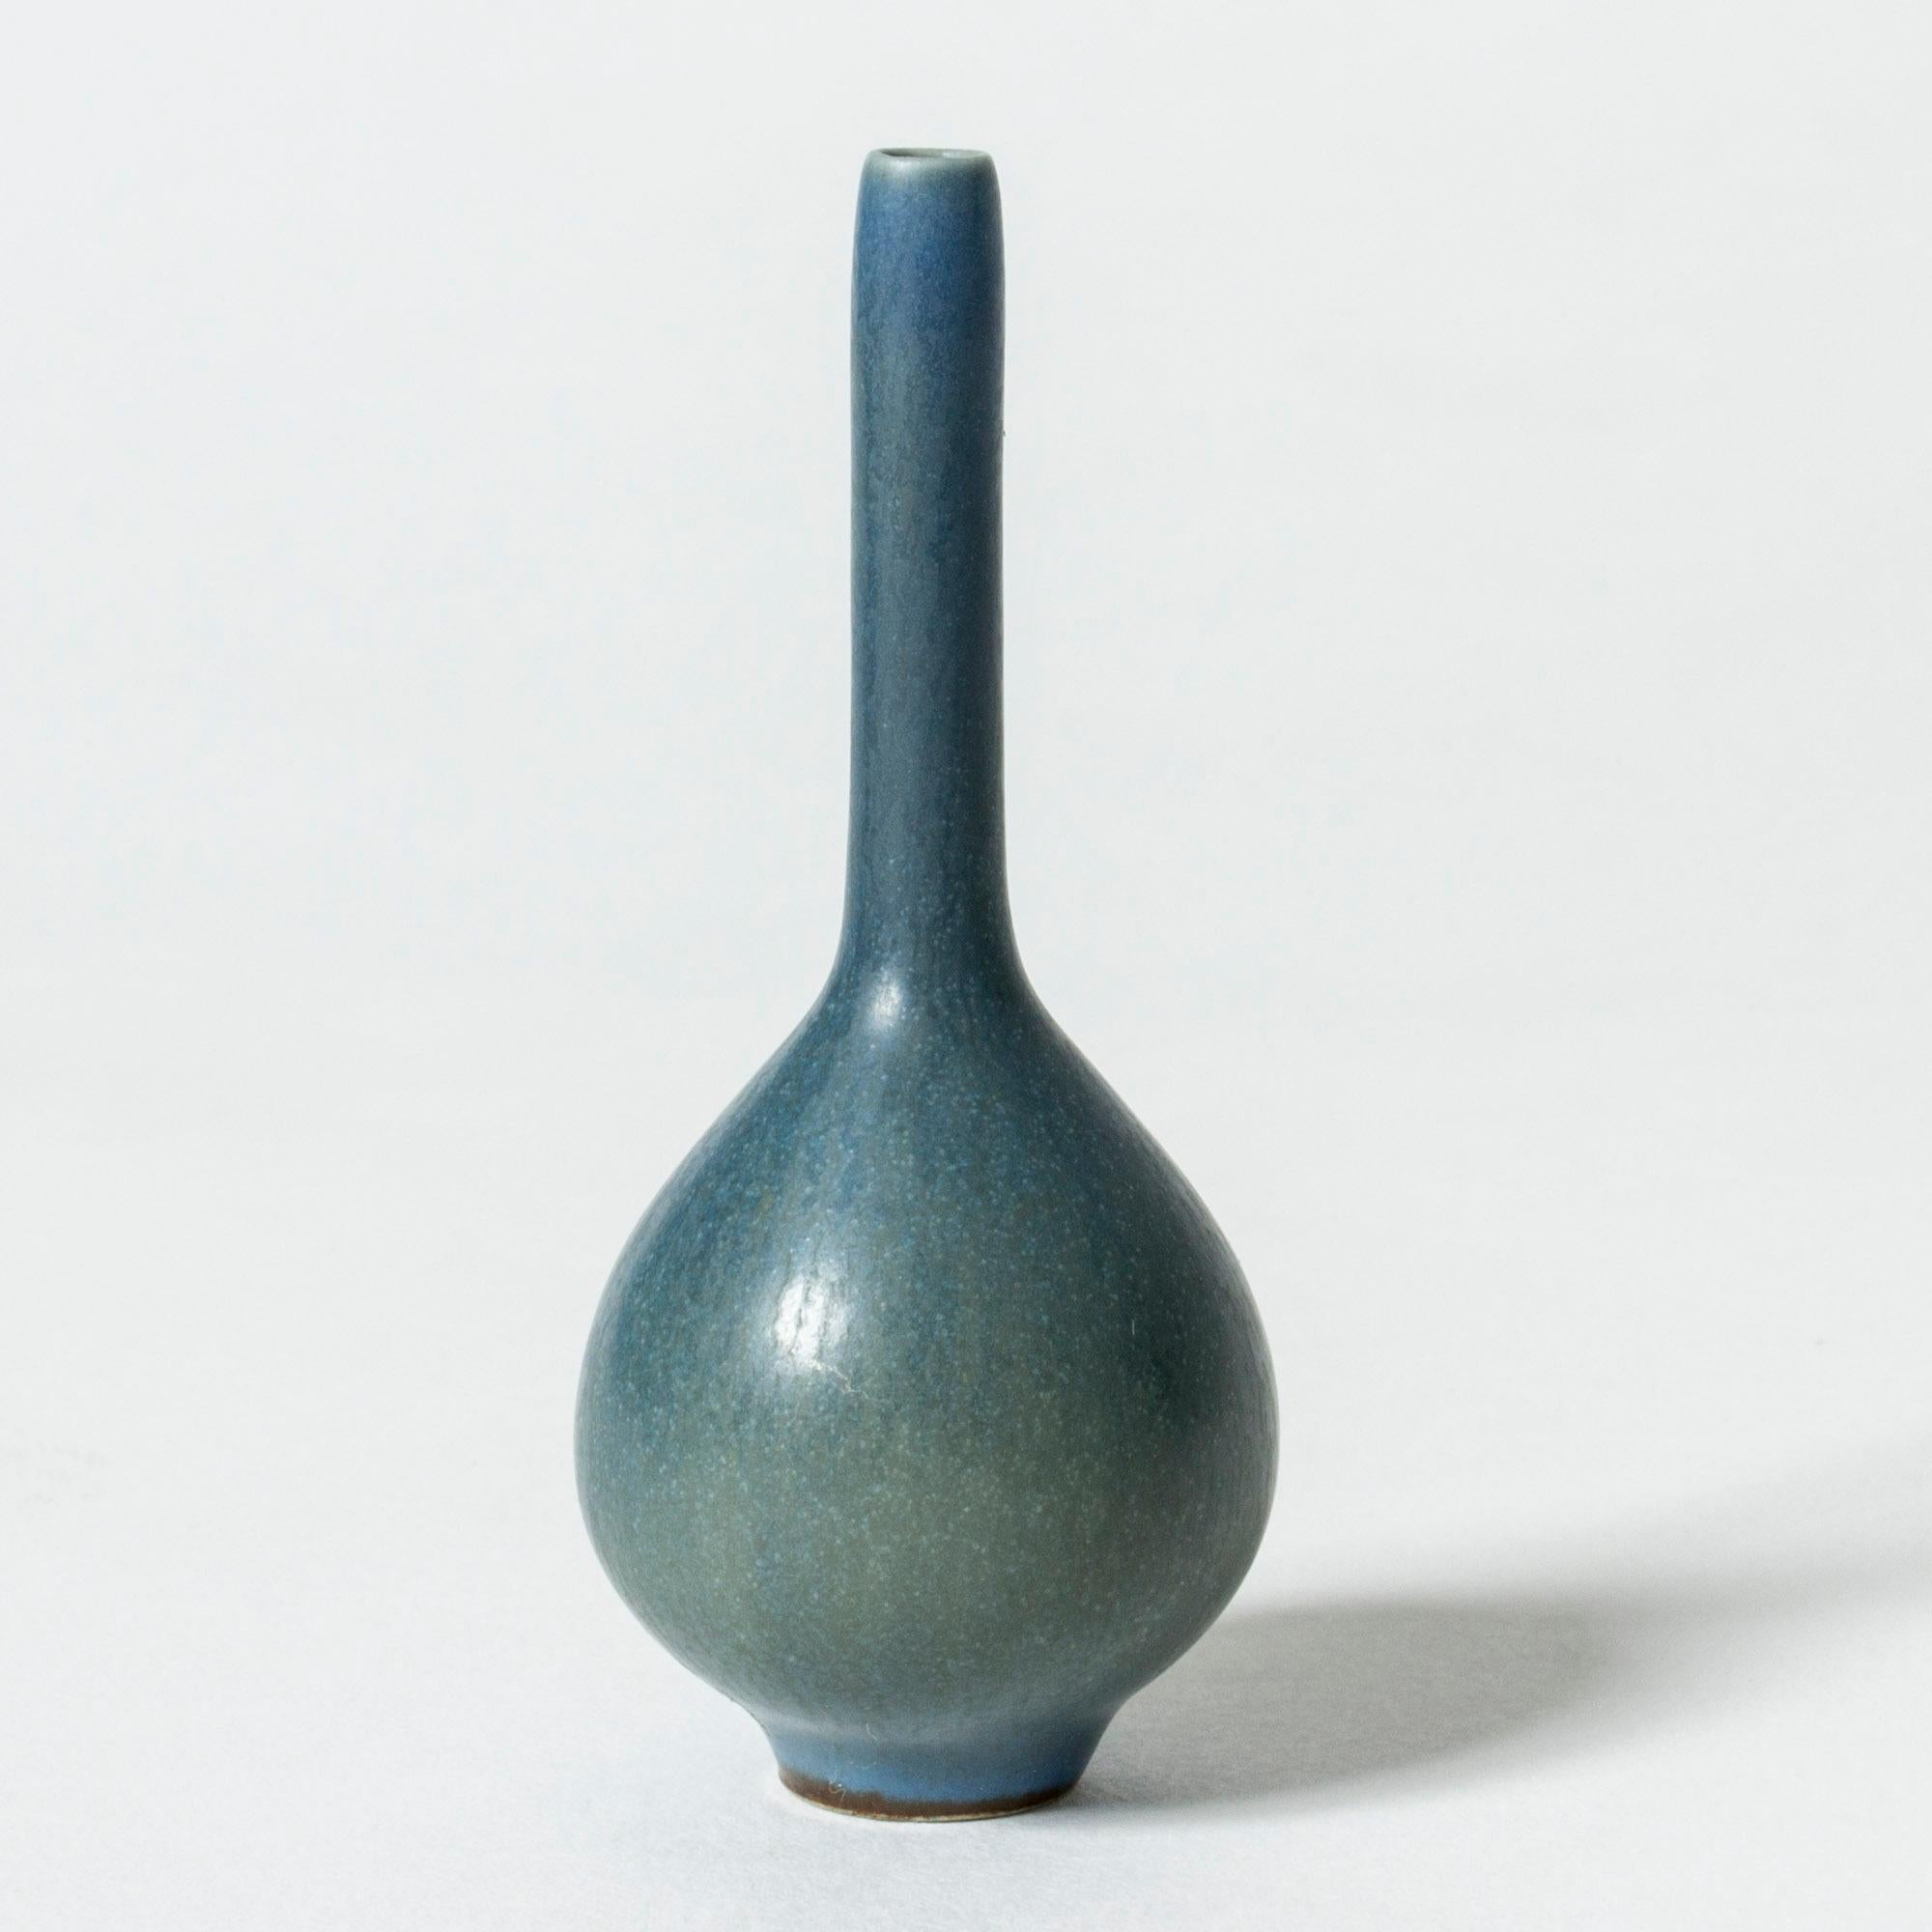 Miniature stoneware vase by Berndt Friberg, in an onion form with a striking, straight neck. Vibrant blue hare’s fur glaze.